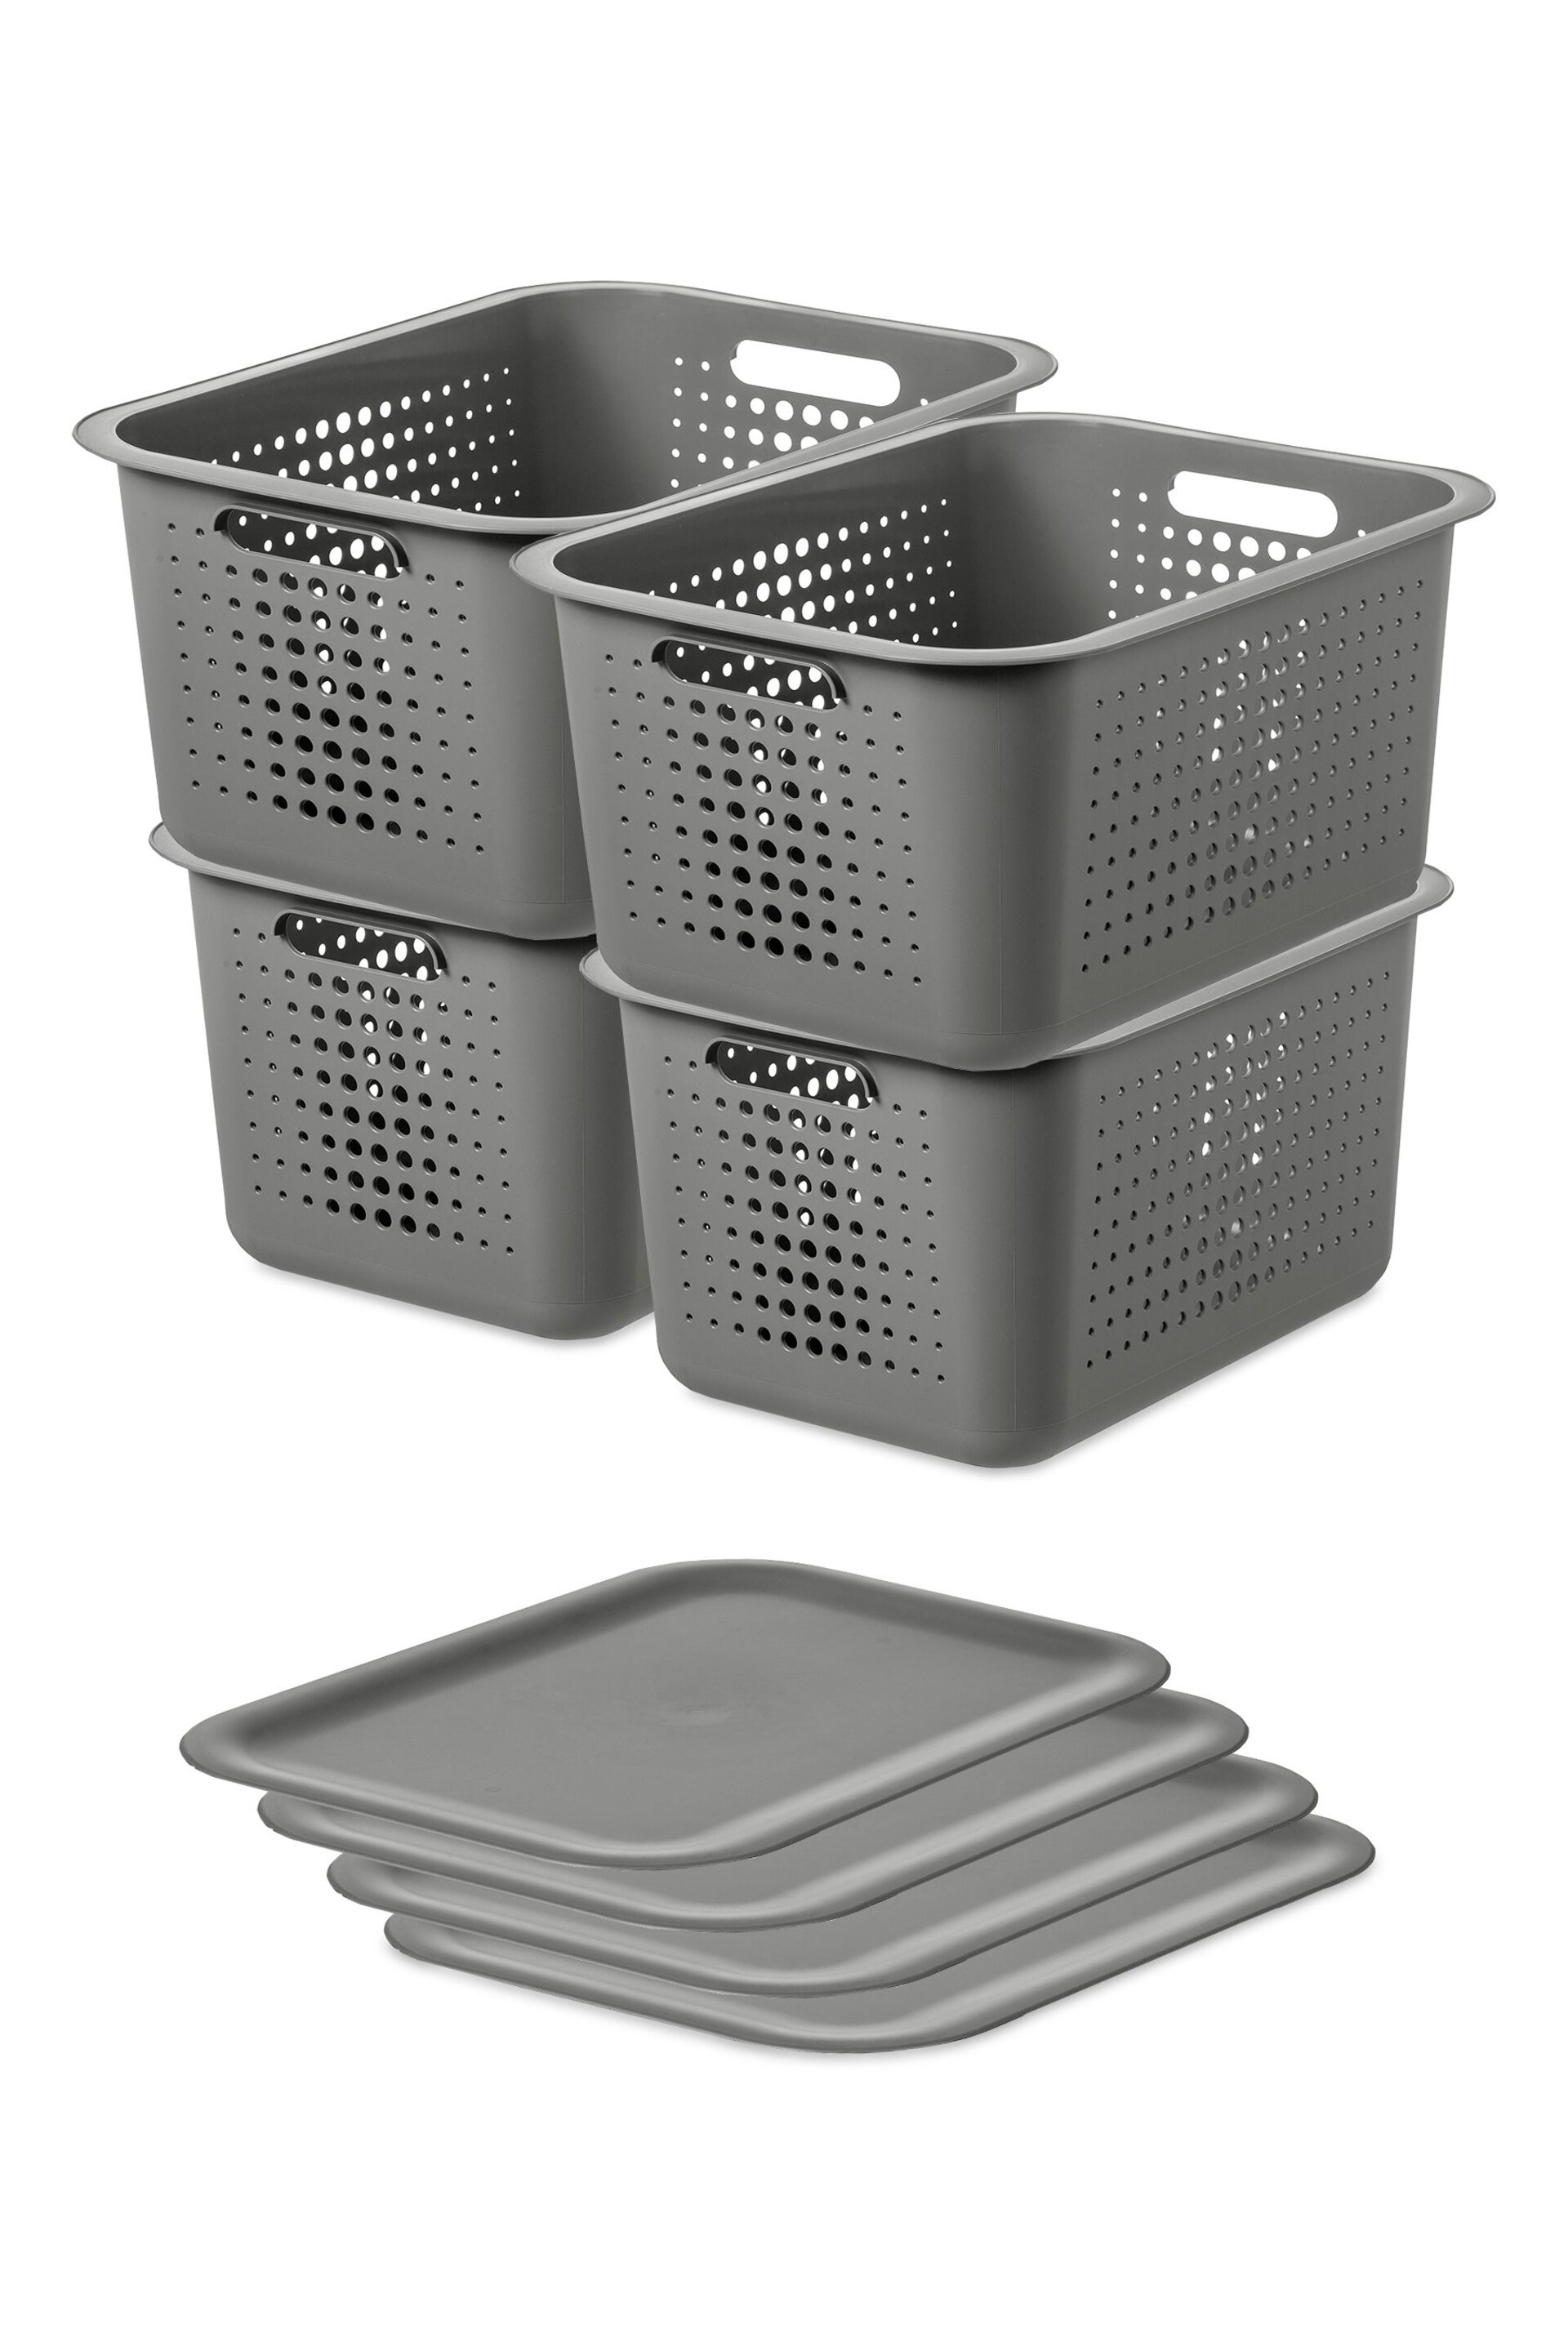 Orthex Grey Smartstore Set of 4 13L Baskets With Lids - Image 6 of 6